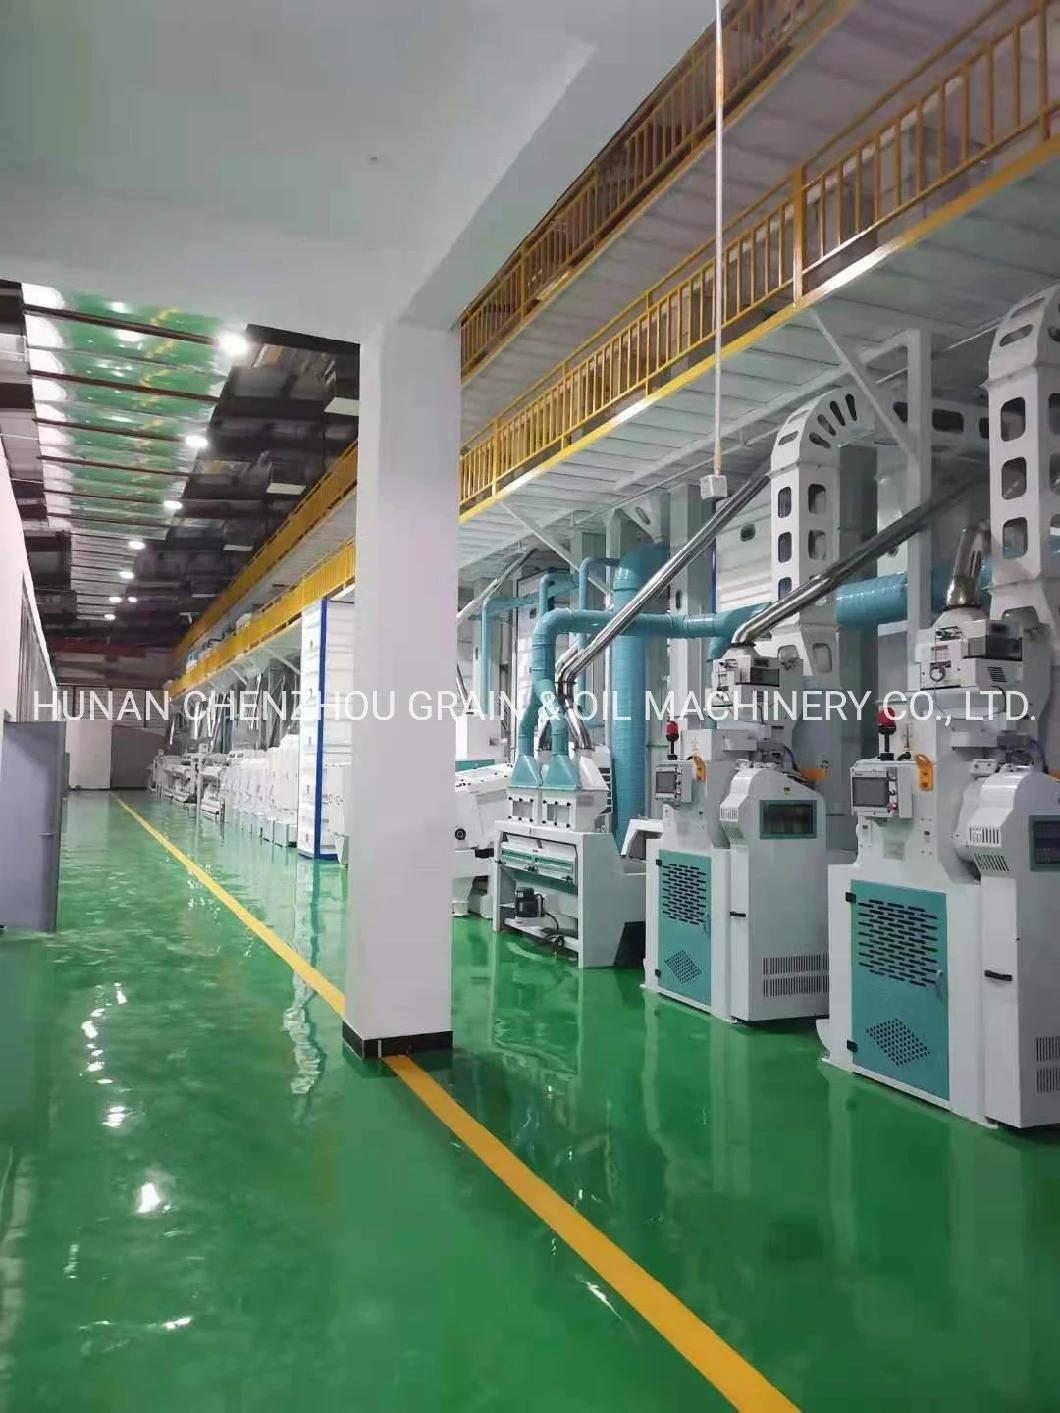 100tpd Parboiling Automatic Rice Milling Bangladesh